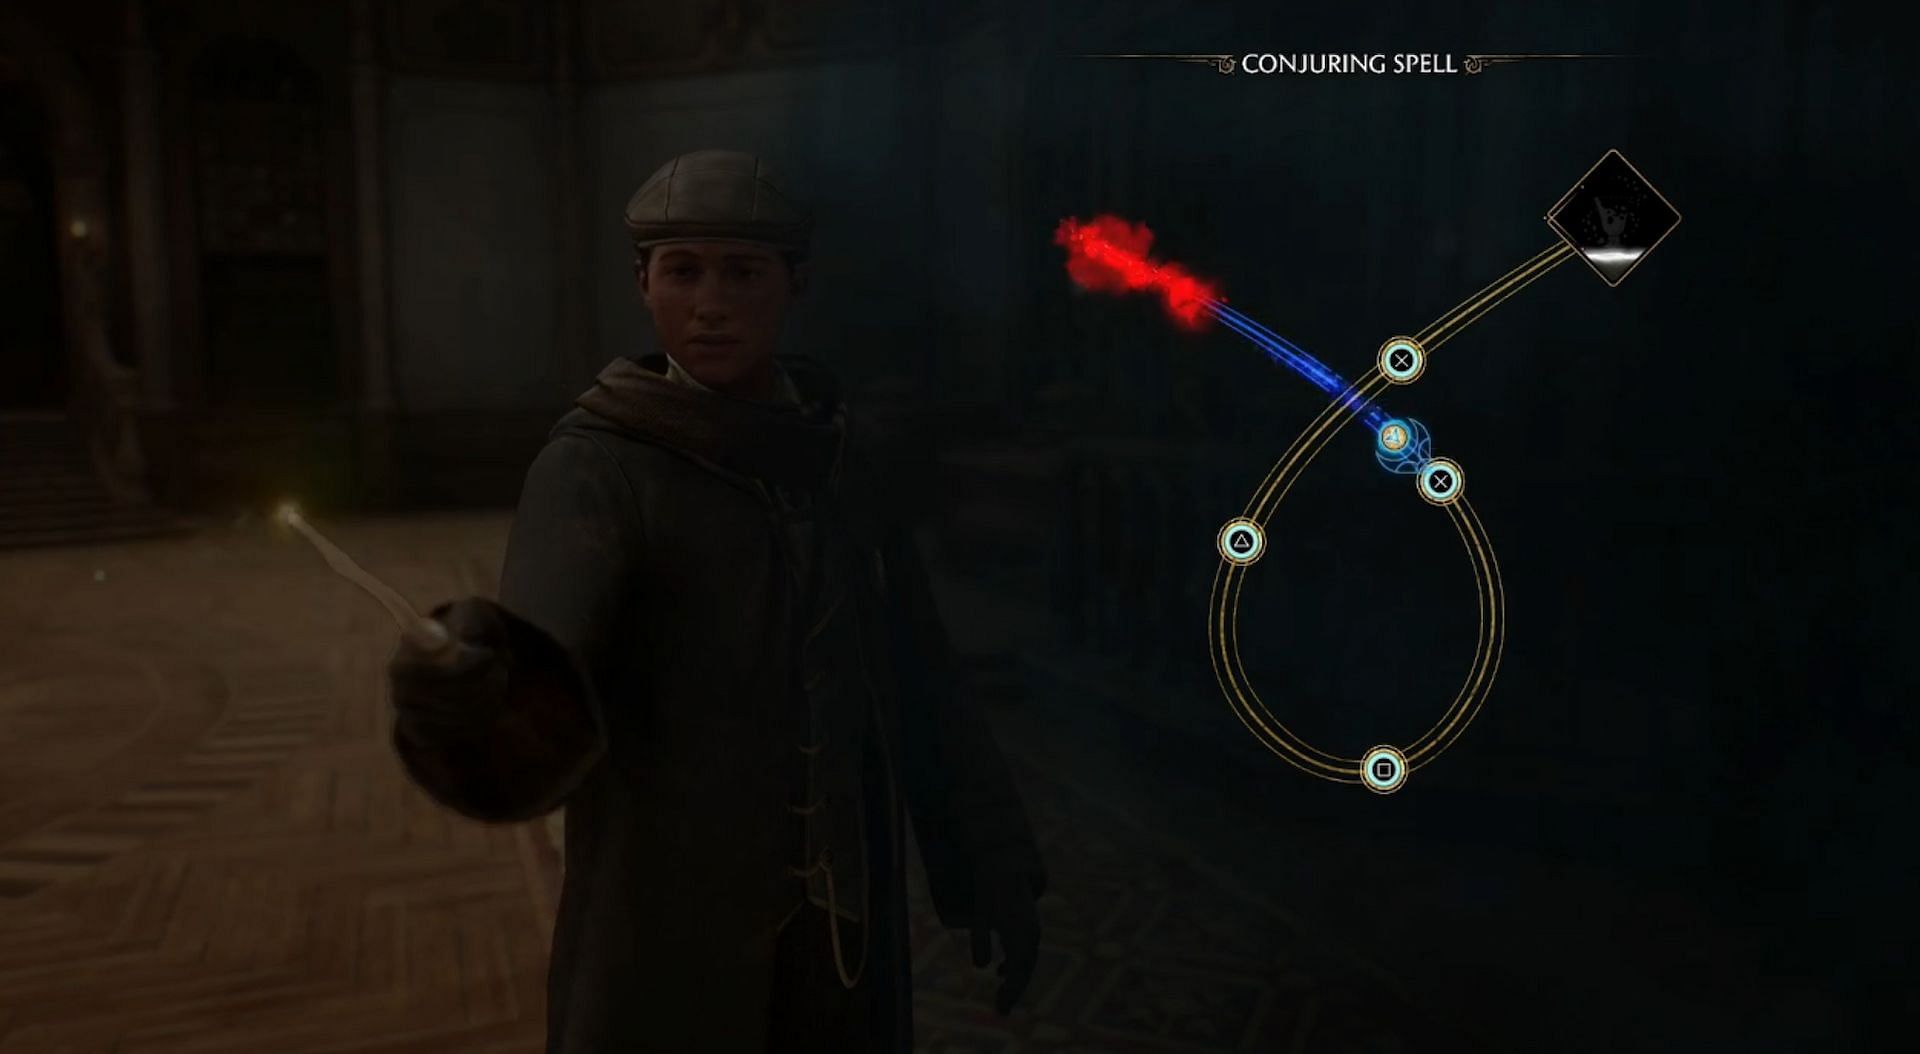 Press the sequence of buttons to learn the Conjuring spell (Image via WB Games)